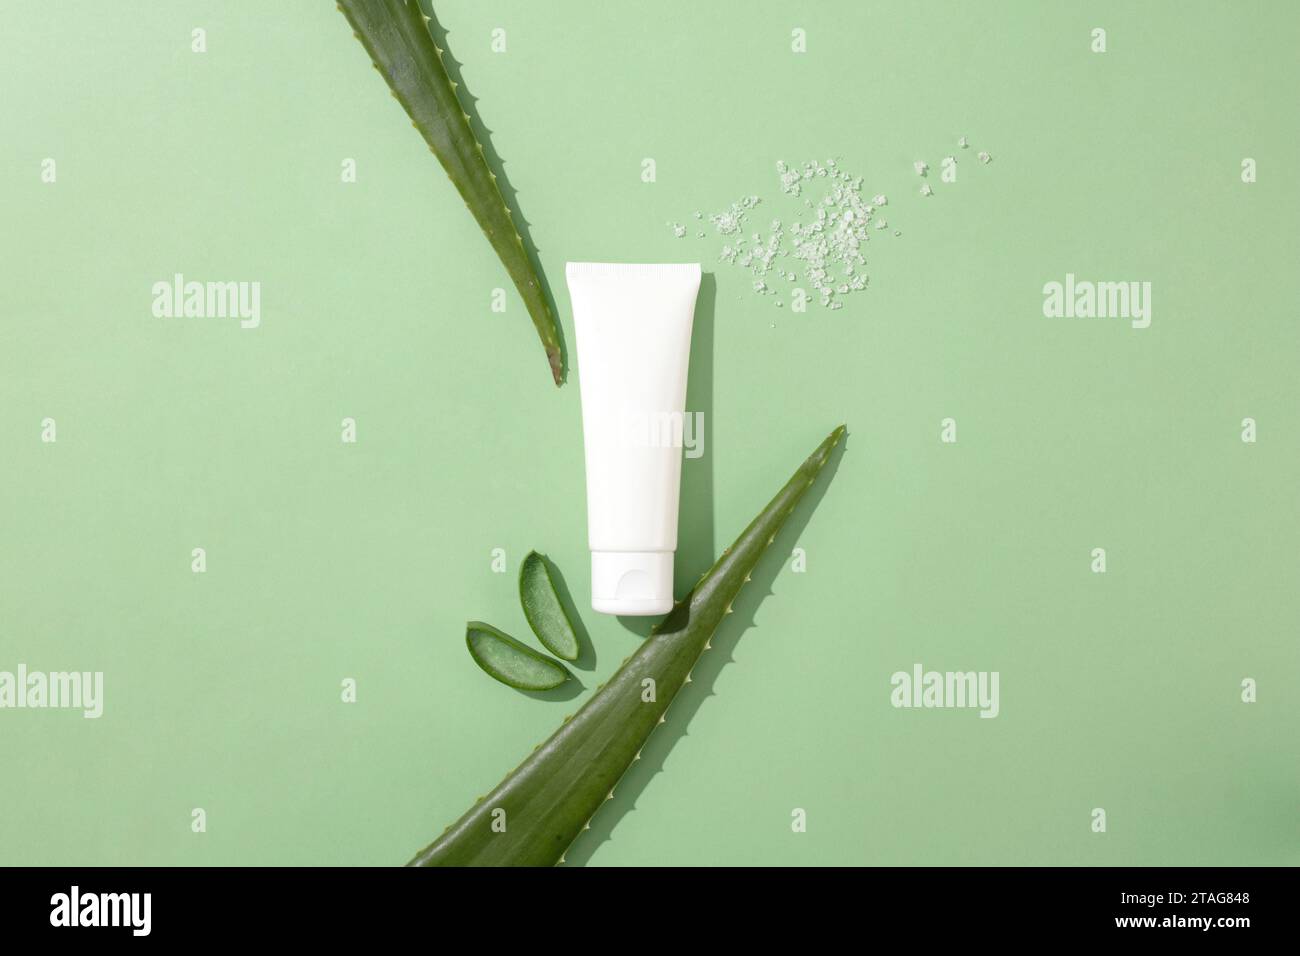 White salt is sprinkled next to an unlabeled tube of facial cleanser and fresh aloe vera leaves on a minimalist background. Aloe vera contains many nu Stock Photo